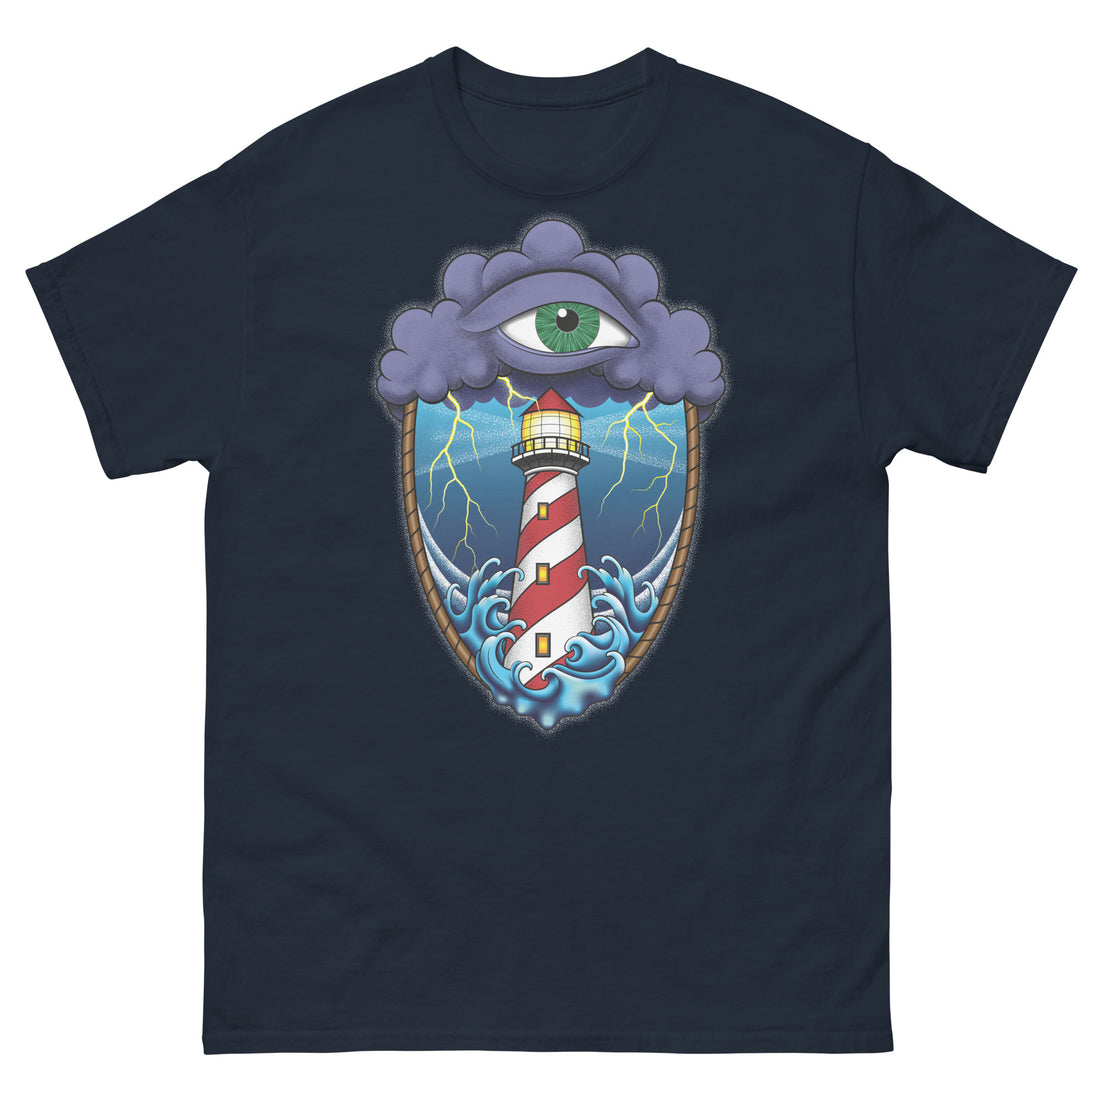 A Navy blue t-shirt with an old school eye of the storm tattoo design of large dark purple storm clouds at the top of the design with a green eye in the middle of the clouds.  Below the clouds is an oval shape with brown rope. Inside the rope are stormy seas and a lighthouse with lightning striking in the background.  At the bottom of the design, some of the waves are spilling out of the rope barrier. The sky and seas are hues of blue; the lighthouse is white and red striped like a barber pole.